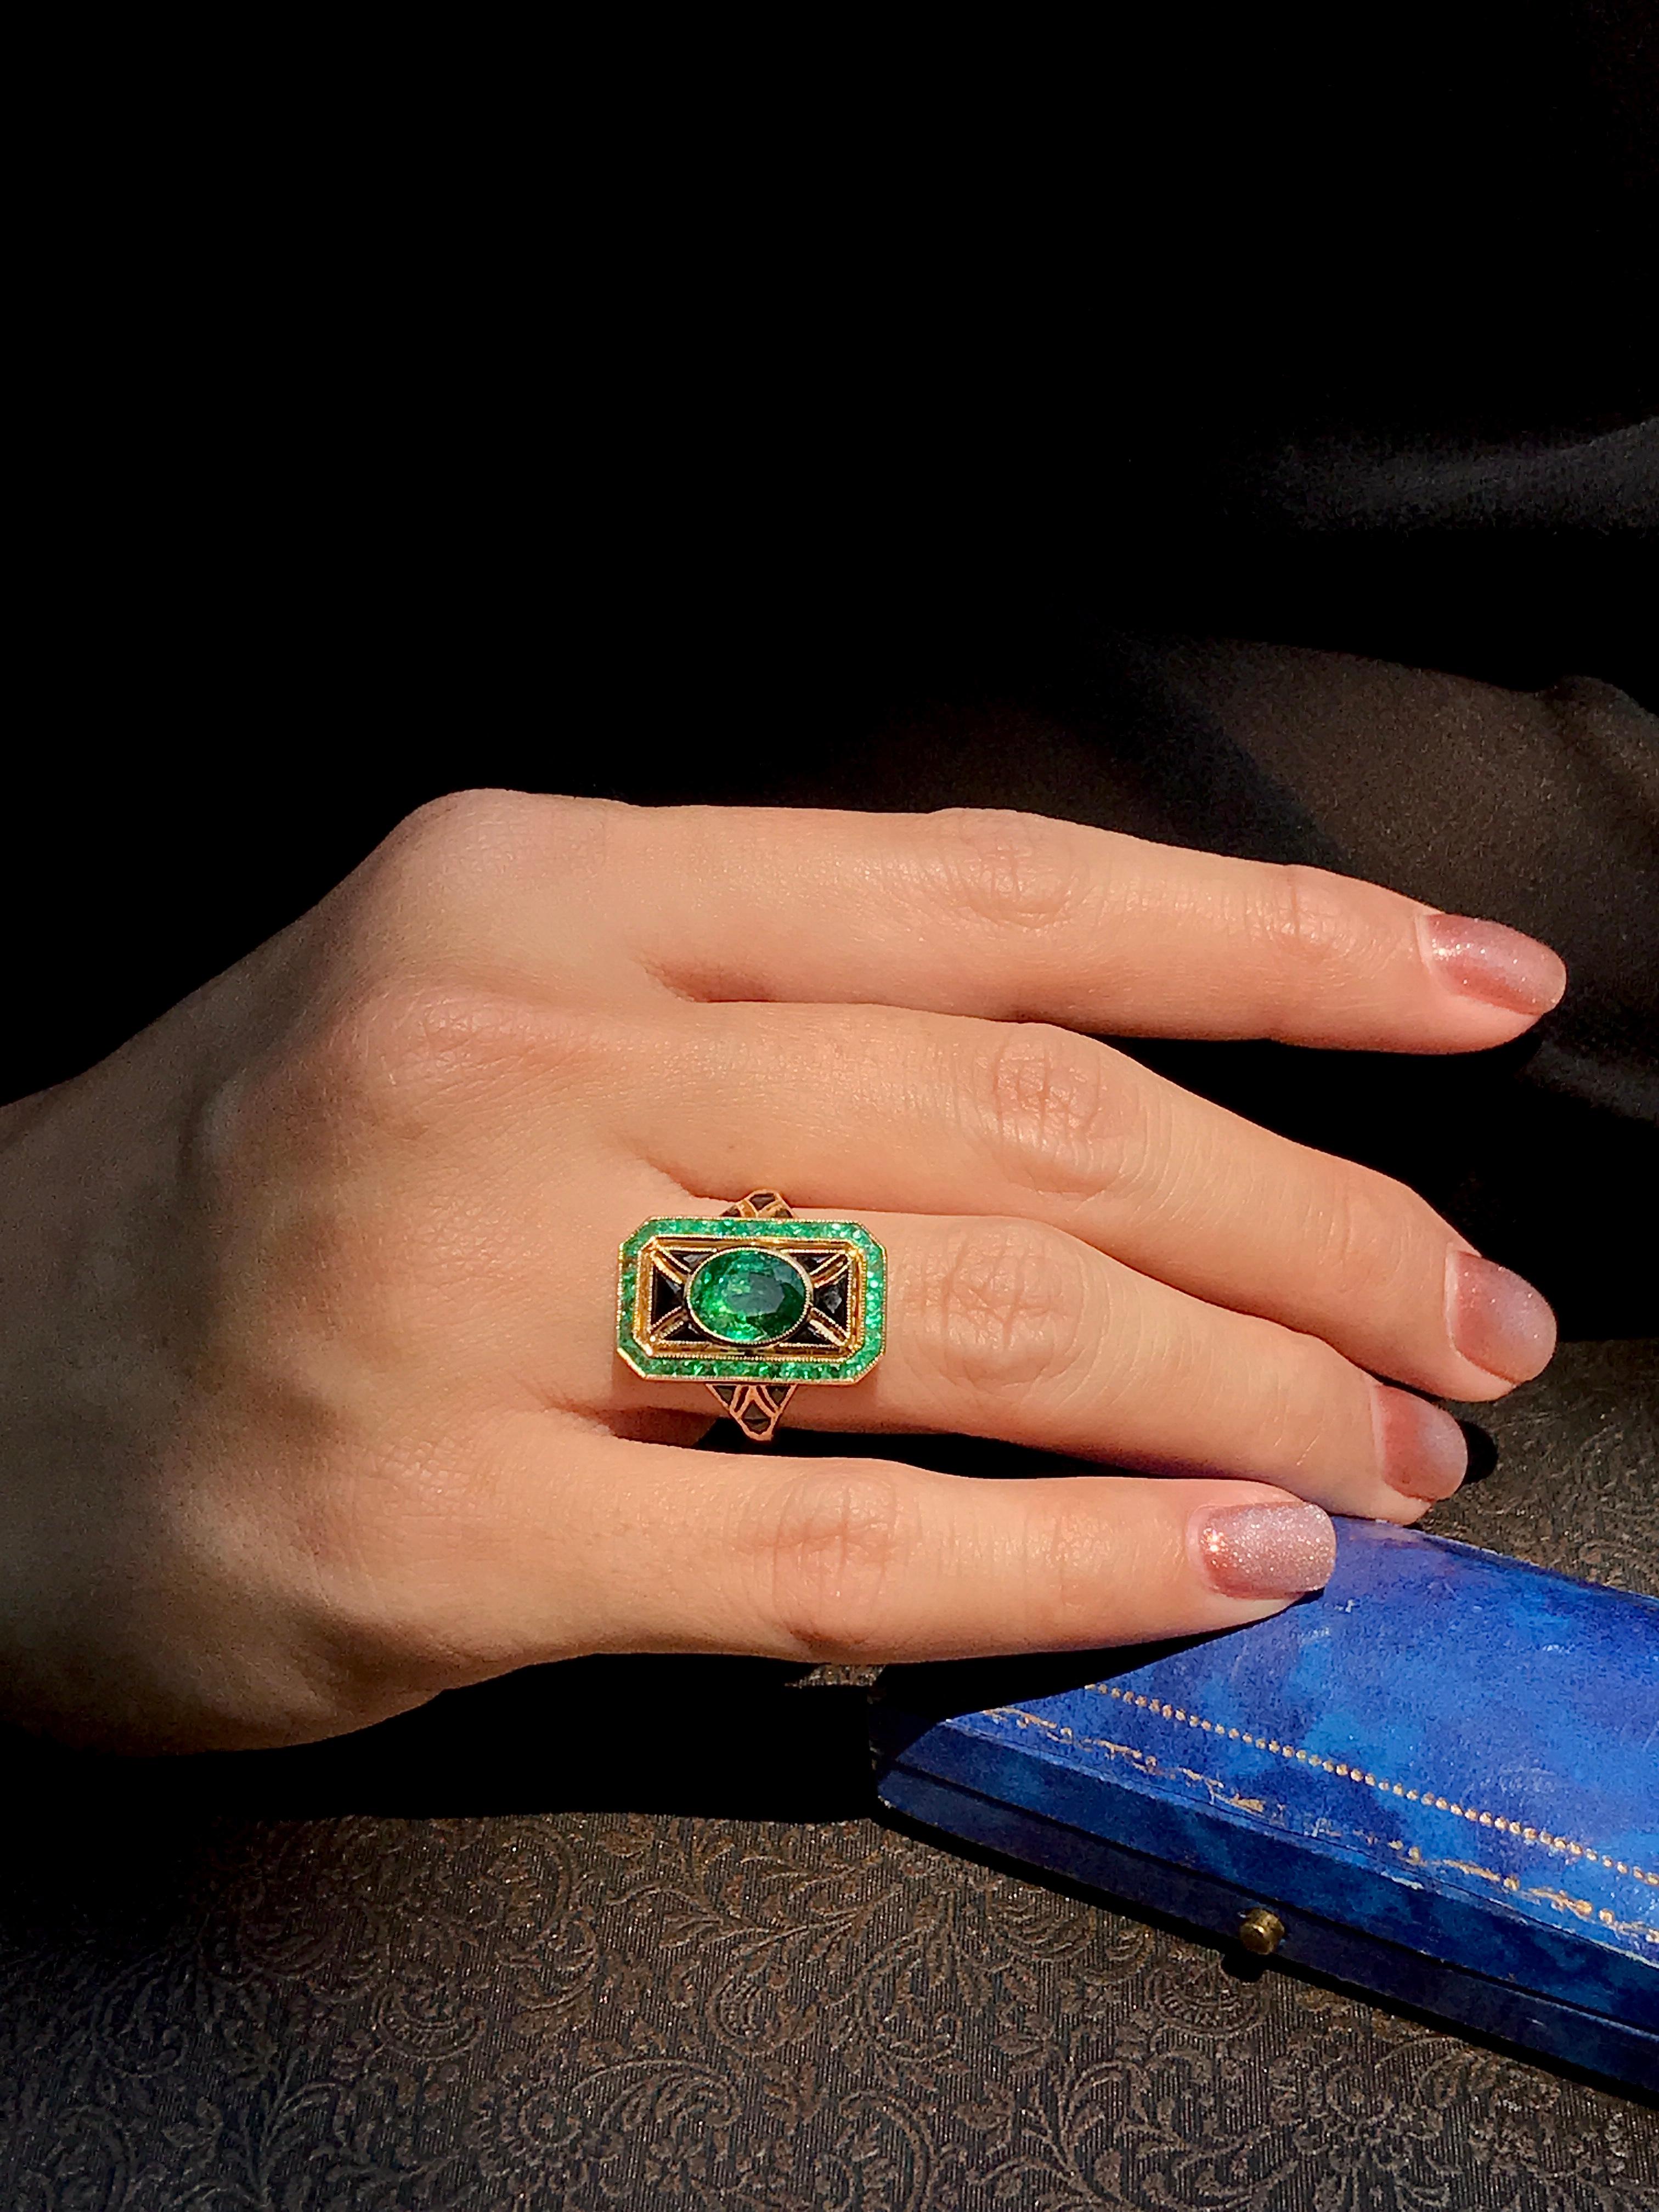 An Art Deco inspired cocktail ring featuring a 1.33 carat oval cut vibrant green emerald in bezel set, surrounded by French cut onyx and emerald. Crafted in 18k yellow gold, the ring is amazingly unique.

Ring Information
Style: Art-deco
Metal: 18K